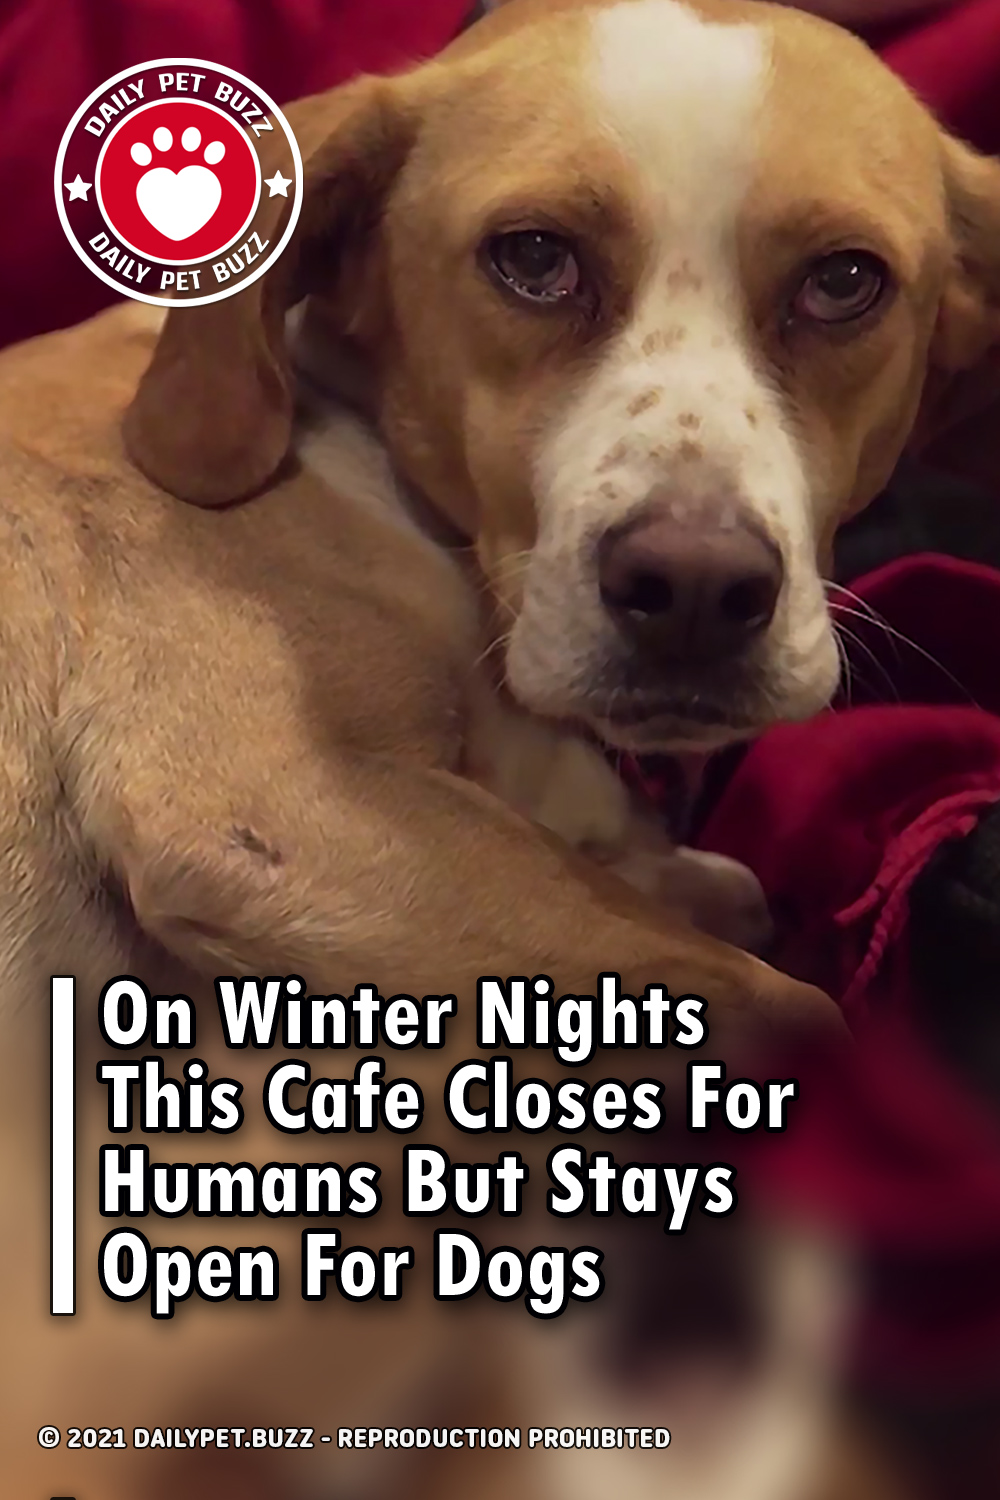 On Winter Nights This Cafe Closes For Humans But Stays Open For Dogs